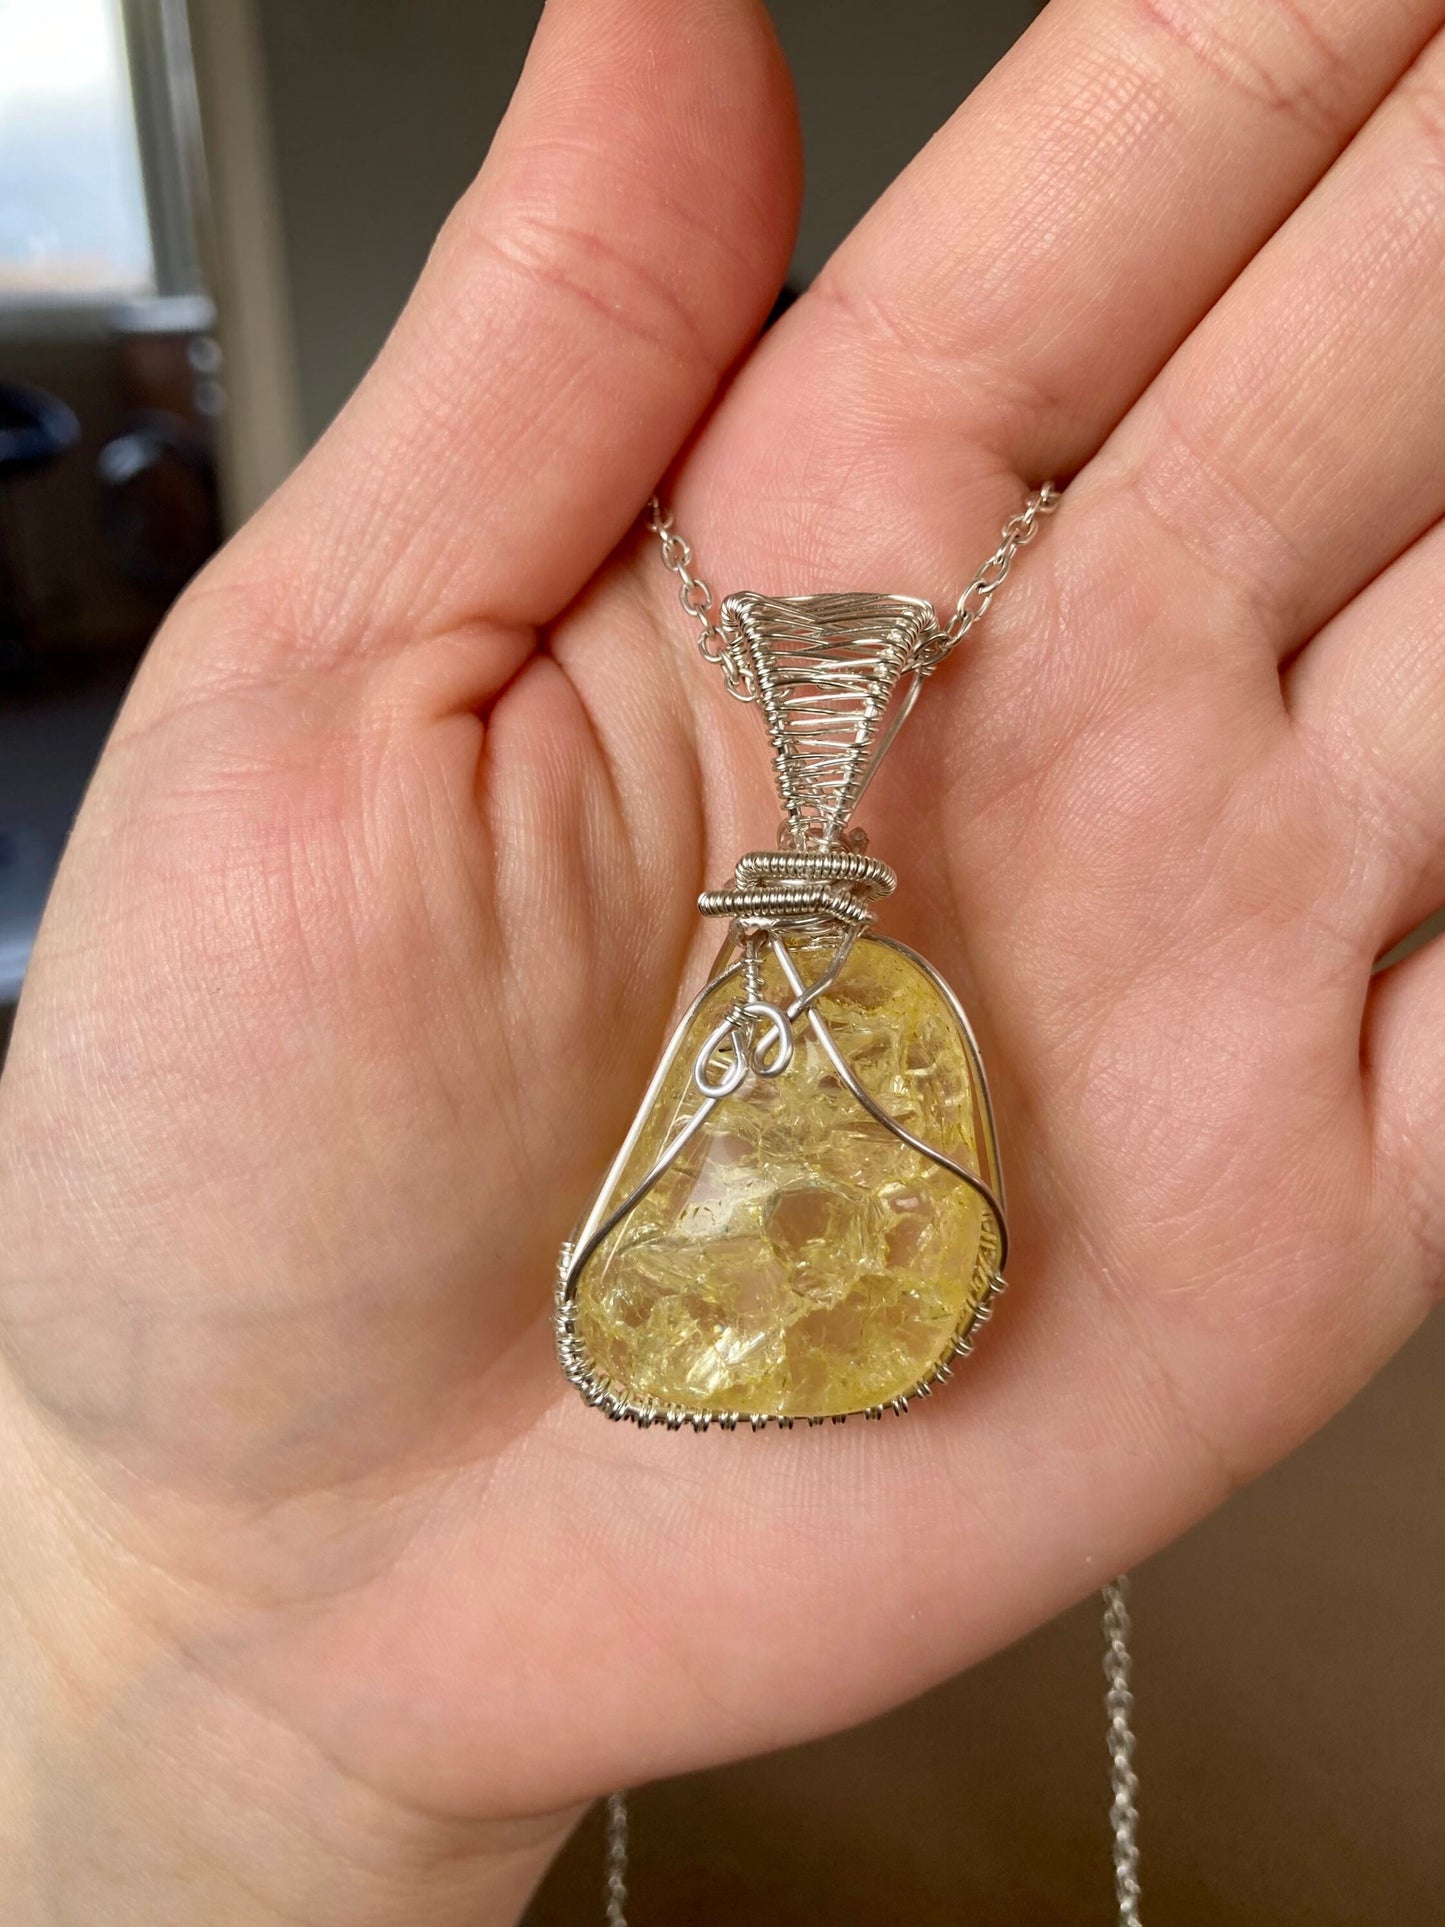 Quartz pendant handmade necklace wire wrapped natural stone with 18 inch length chain